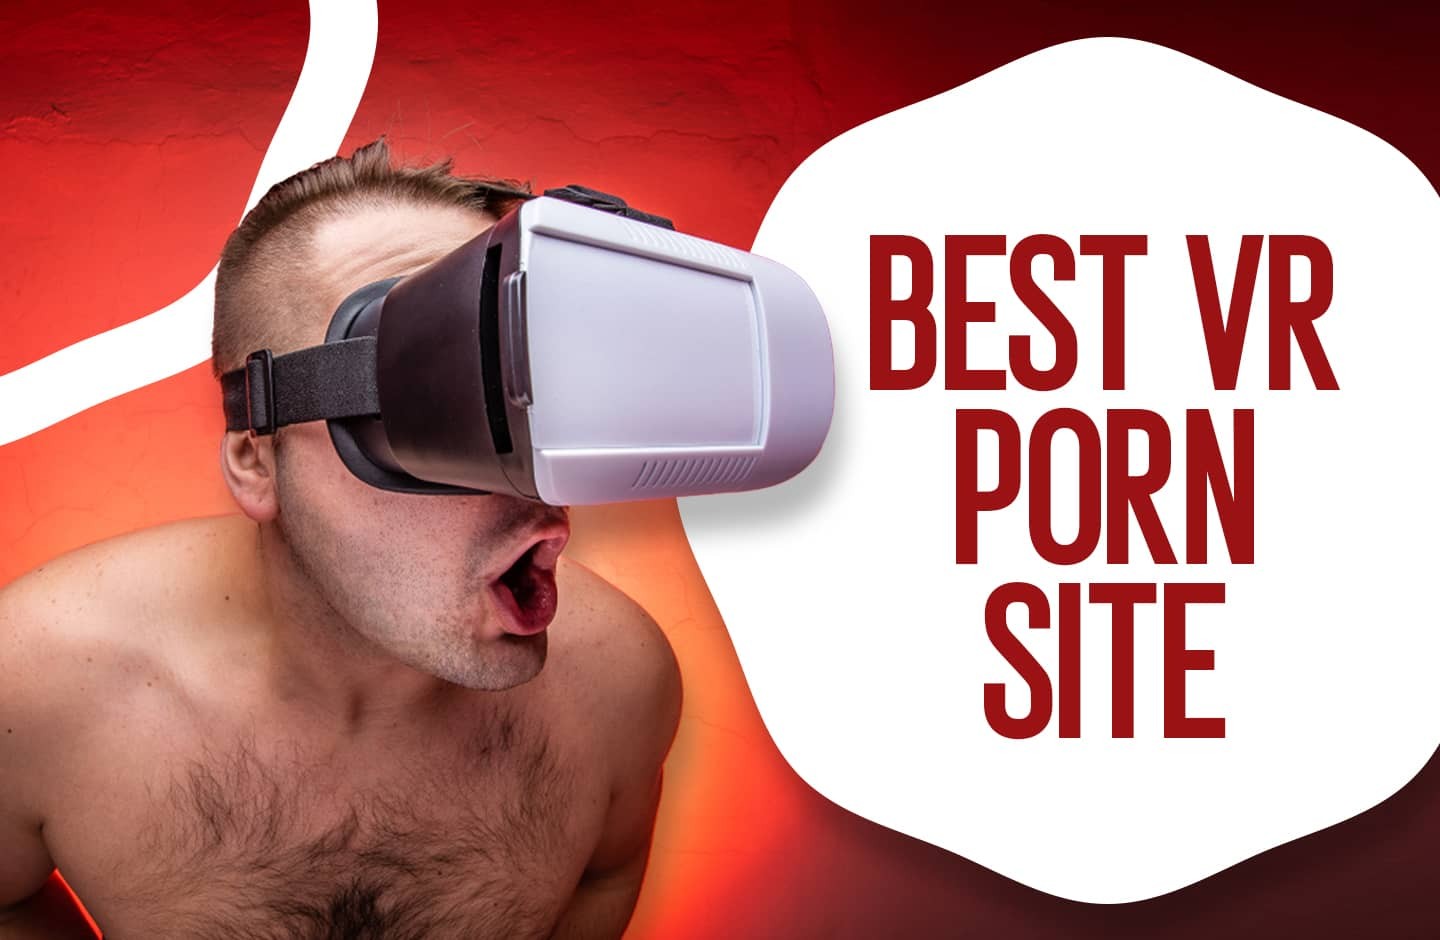 Virtual reality headset for porn